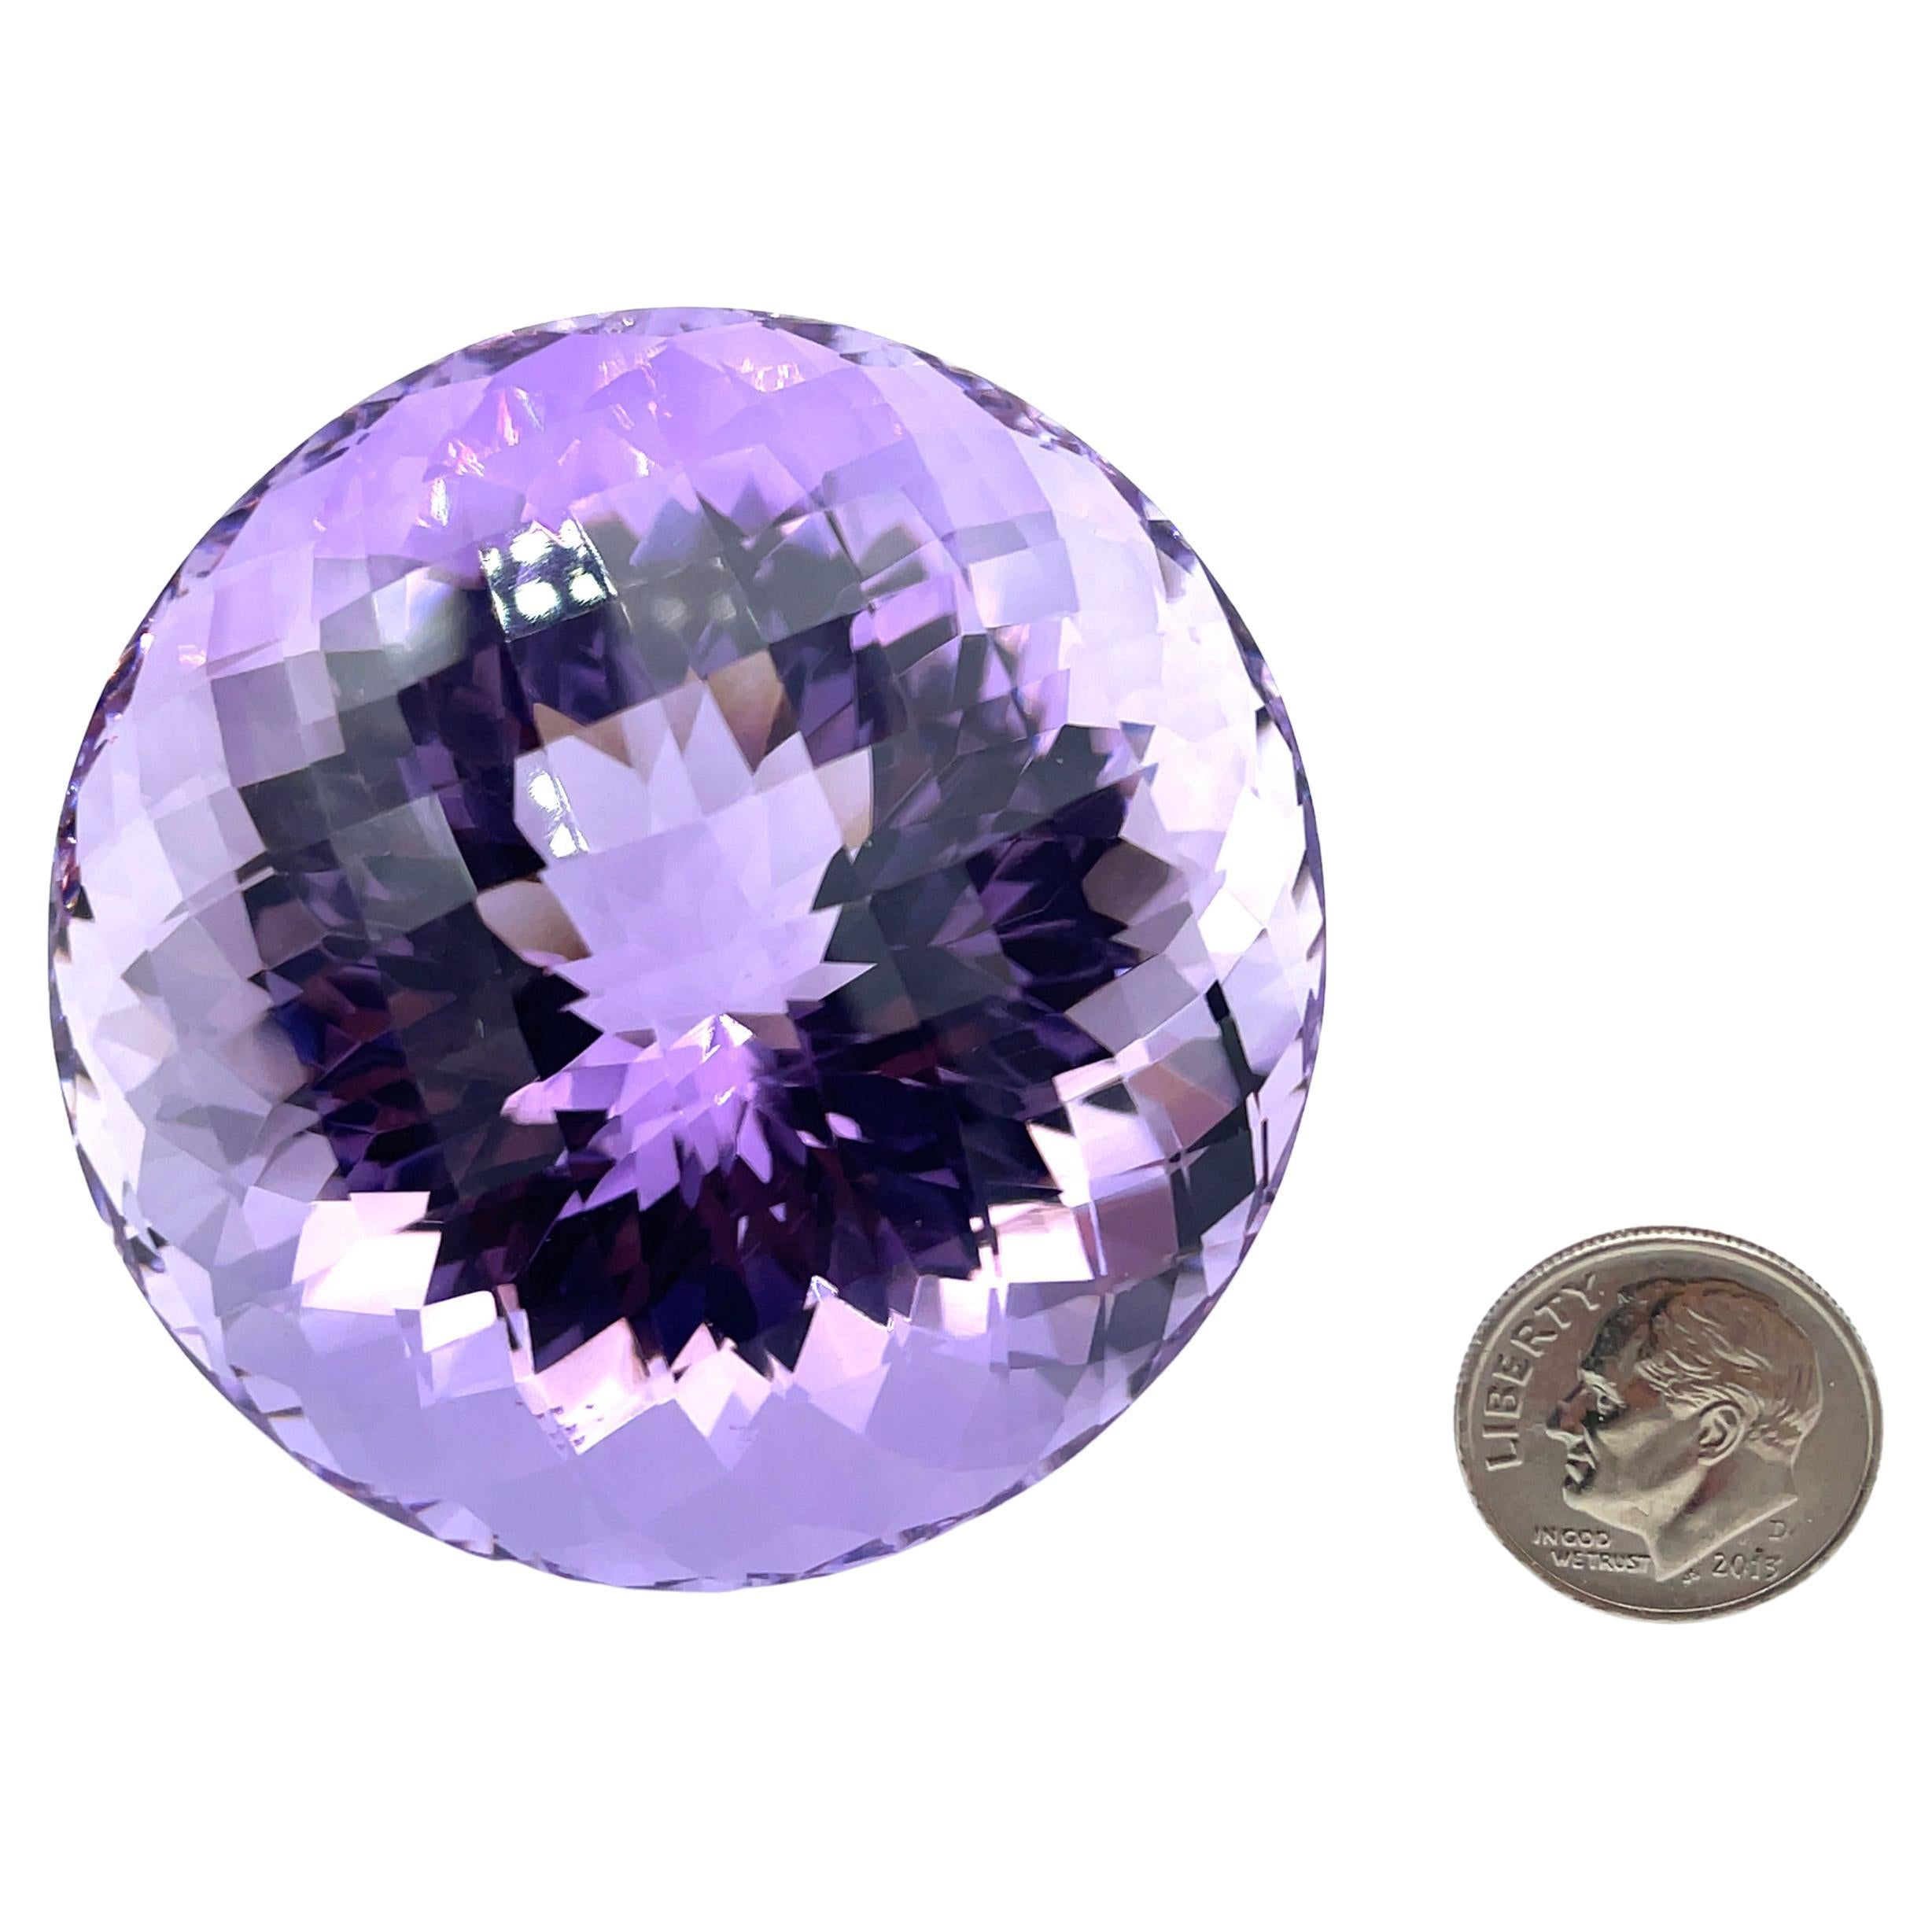 Women's or Men's 651 Carat Round Faceted Checkerboard Amethyst Collector Gemstone  For Sale